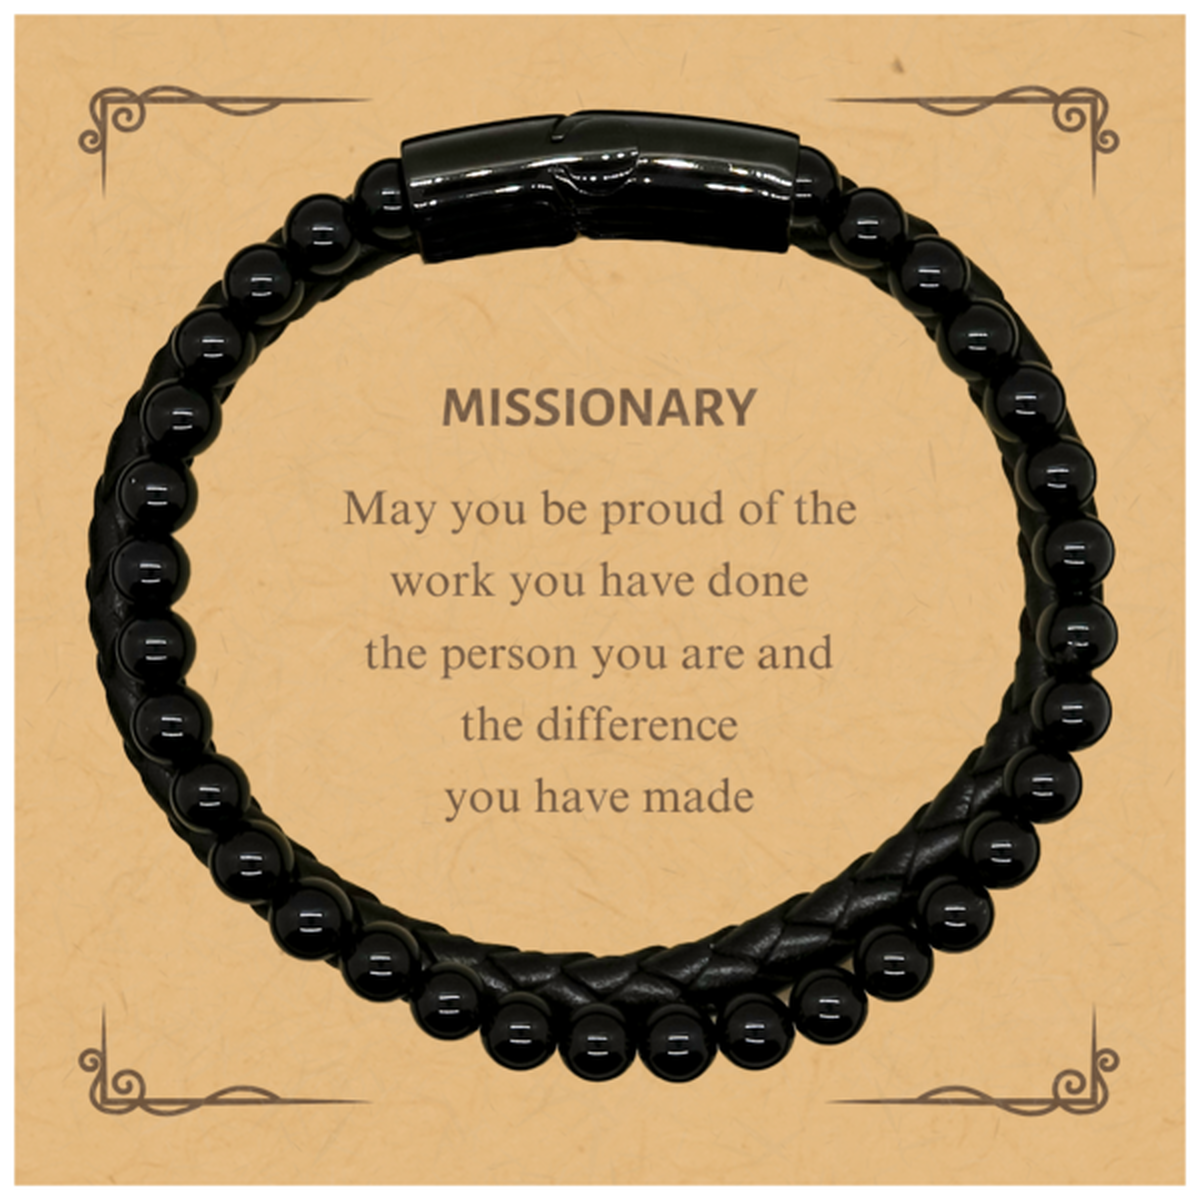 Missionary May you be proud of the work you have done, Retirement Missionary Stone Leather Bracelets for Colleague Appreciation Gifts Amazing for Missionary